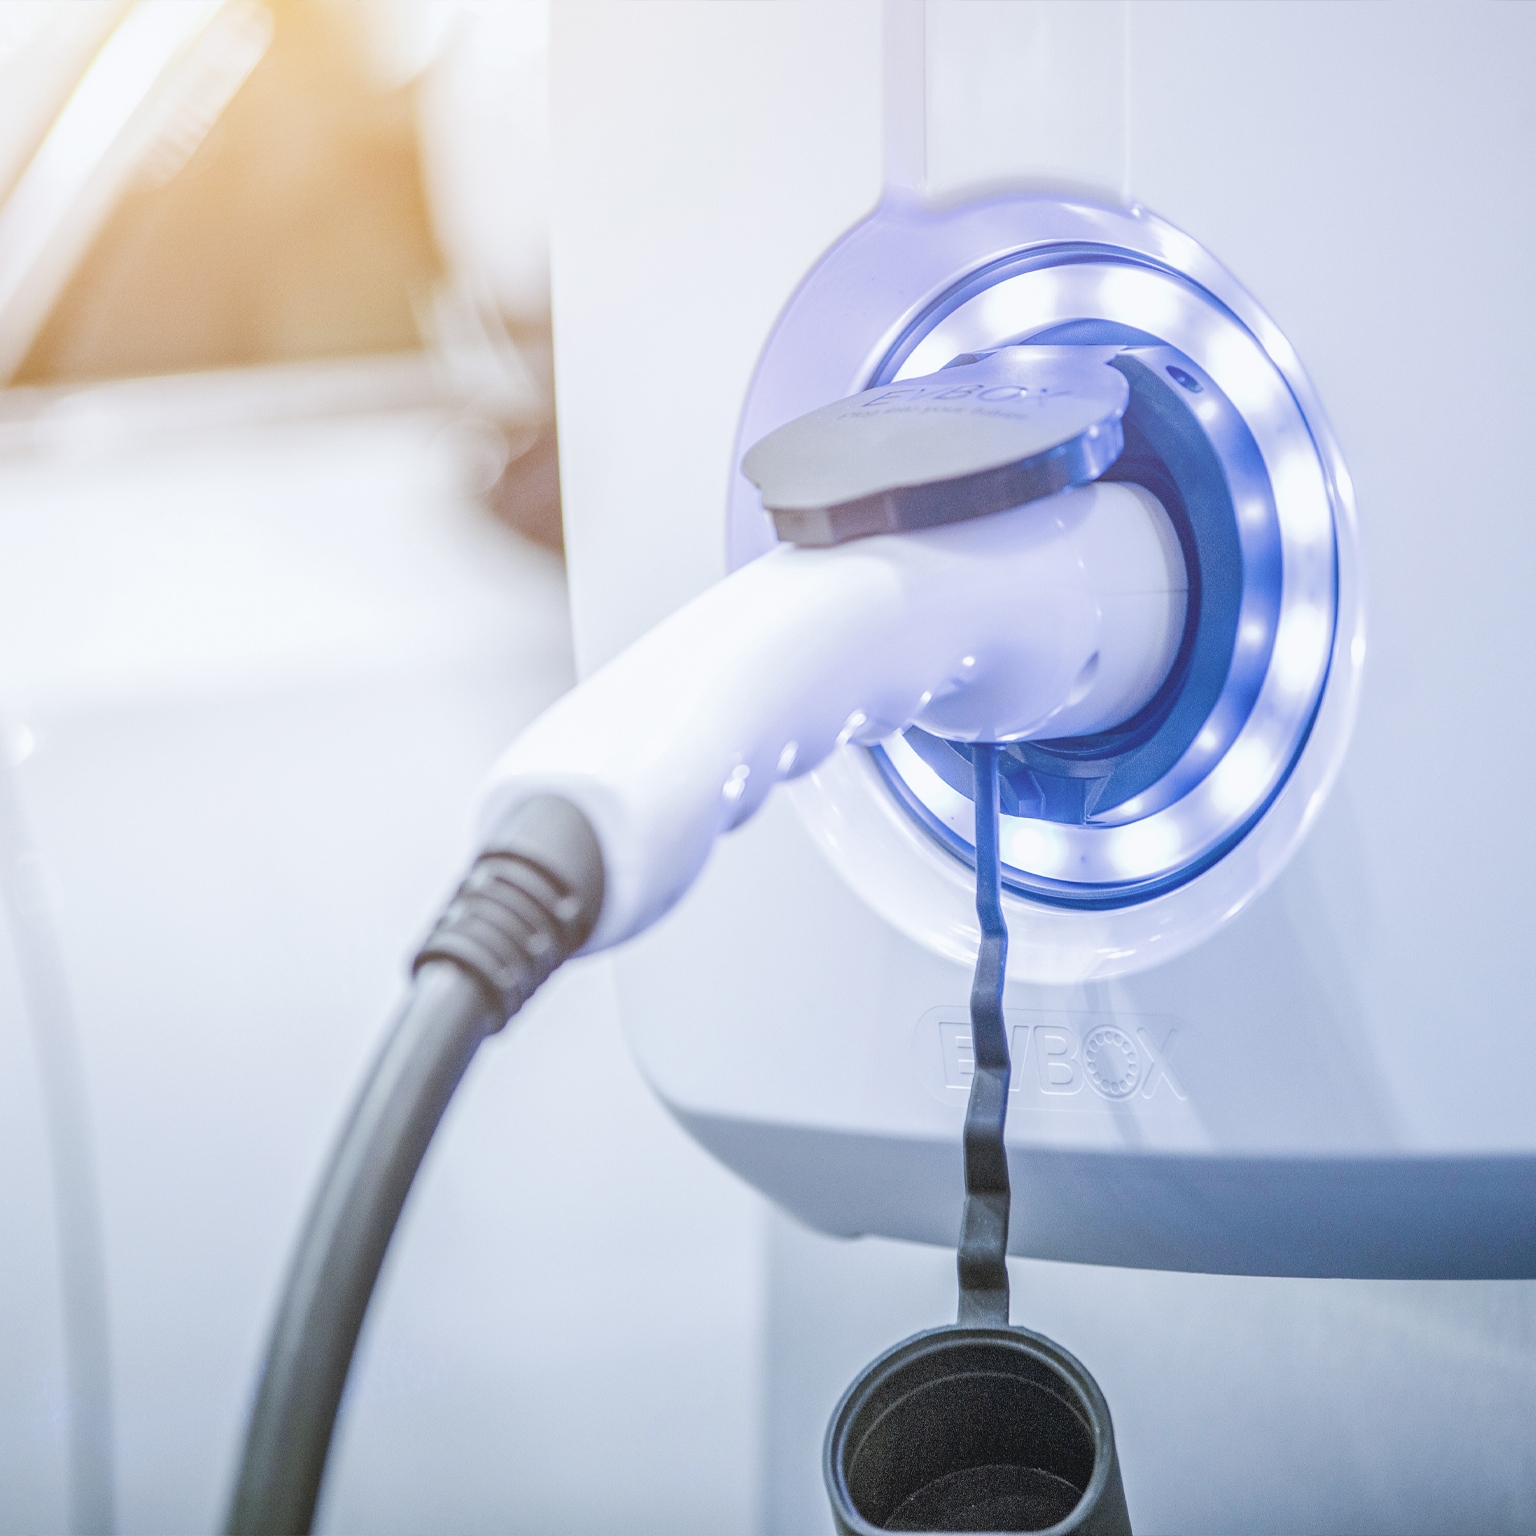 Electric Vehicle fluids Say Goodbye to the oil change McKinsey